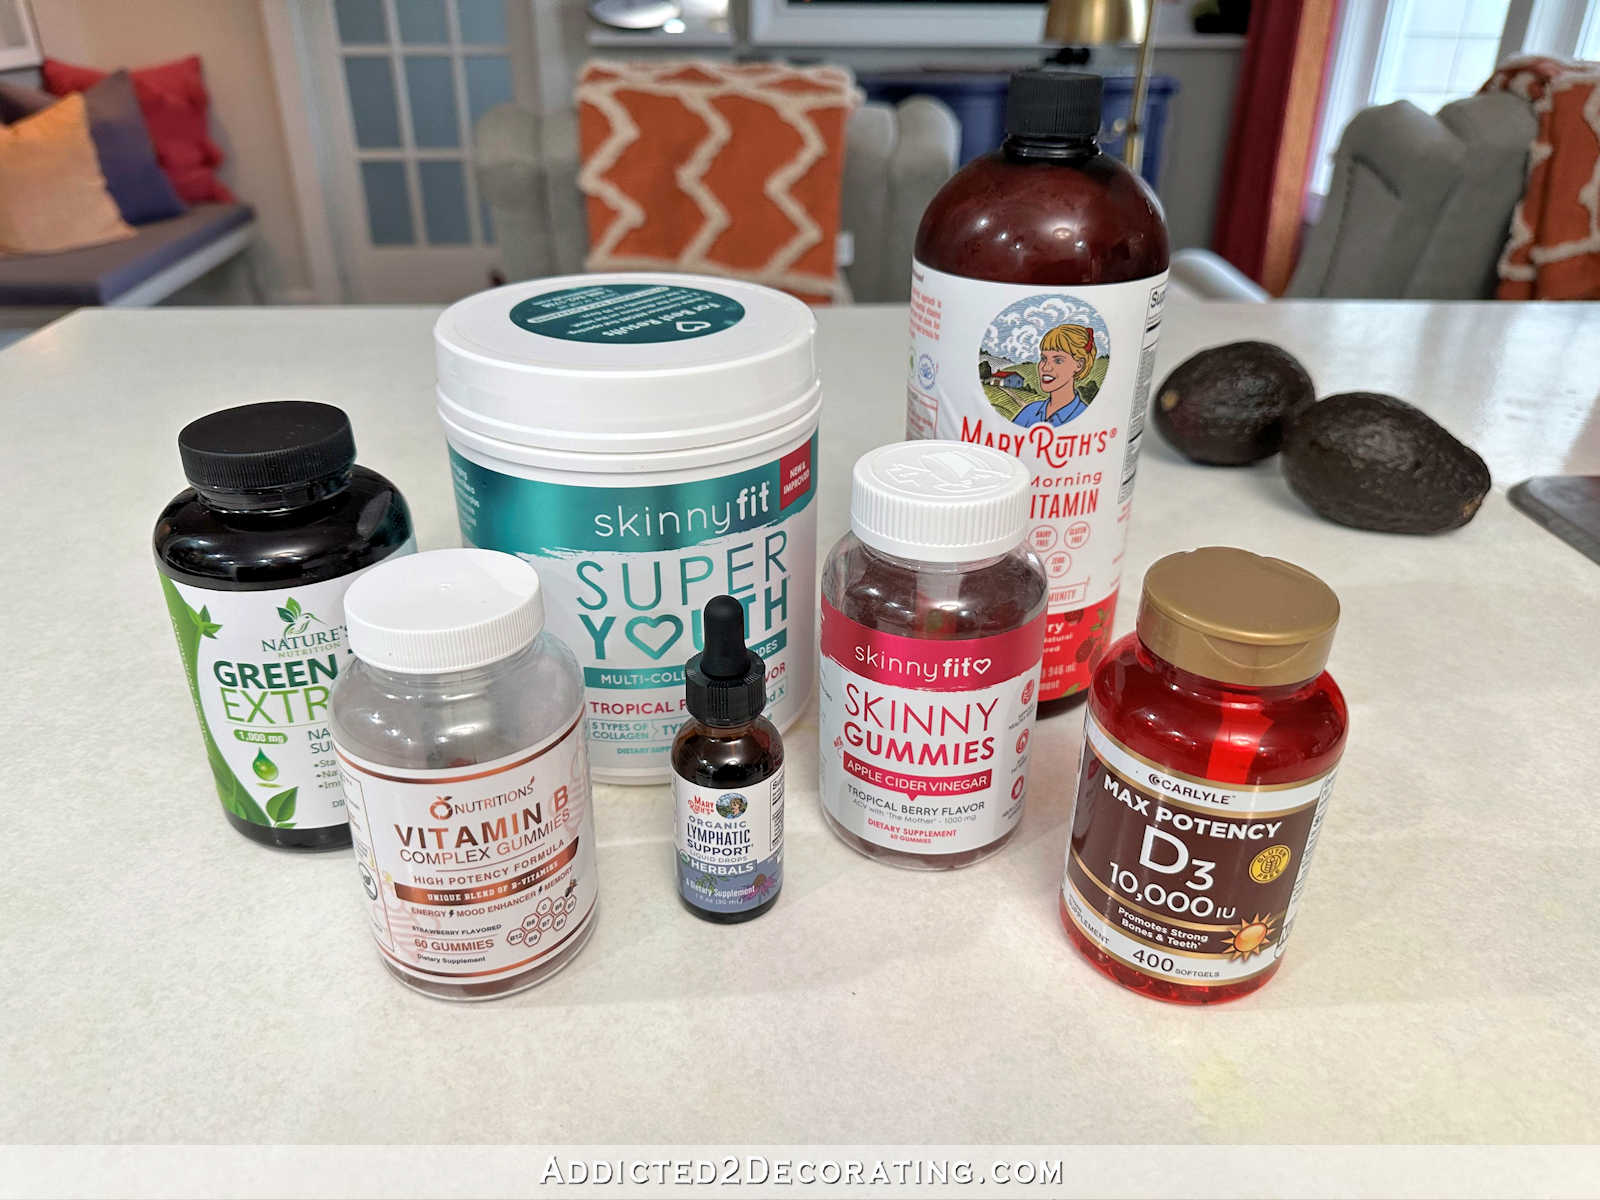 My Morning Routine (And Why I Feel Like I Have Boundless Energy)